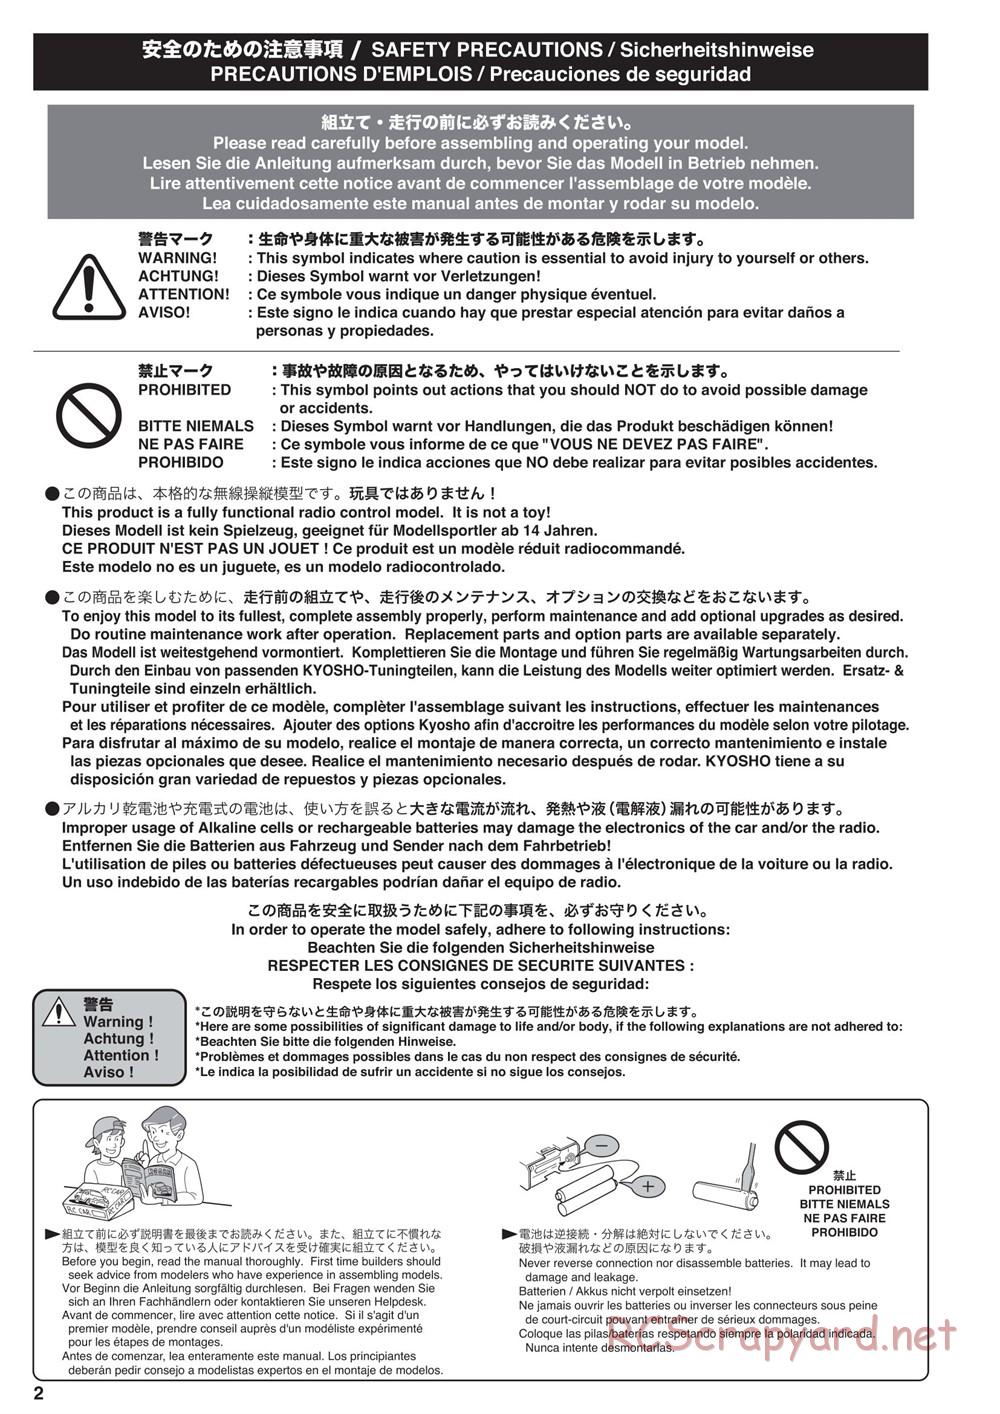 Kyosho - Outlaw Rampage - Manual - Page 2